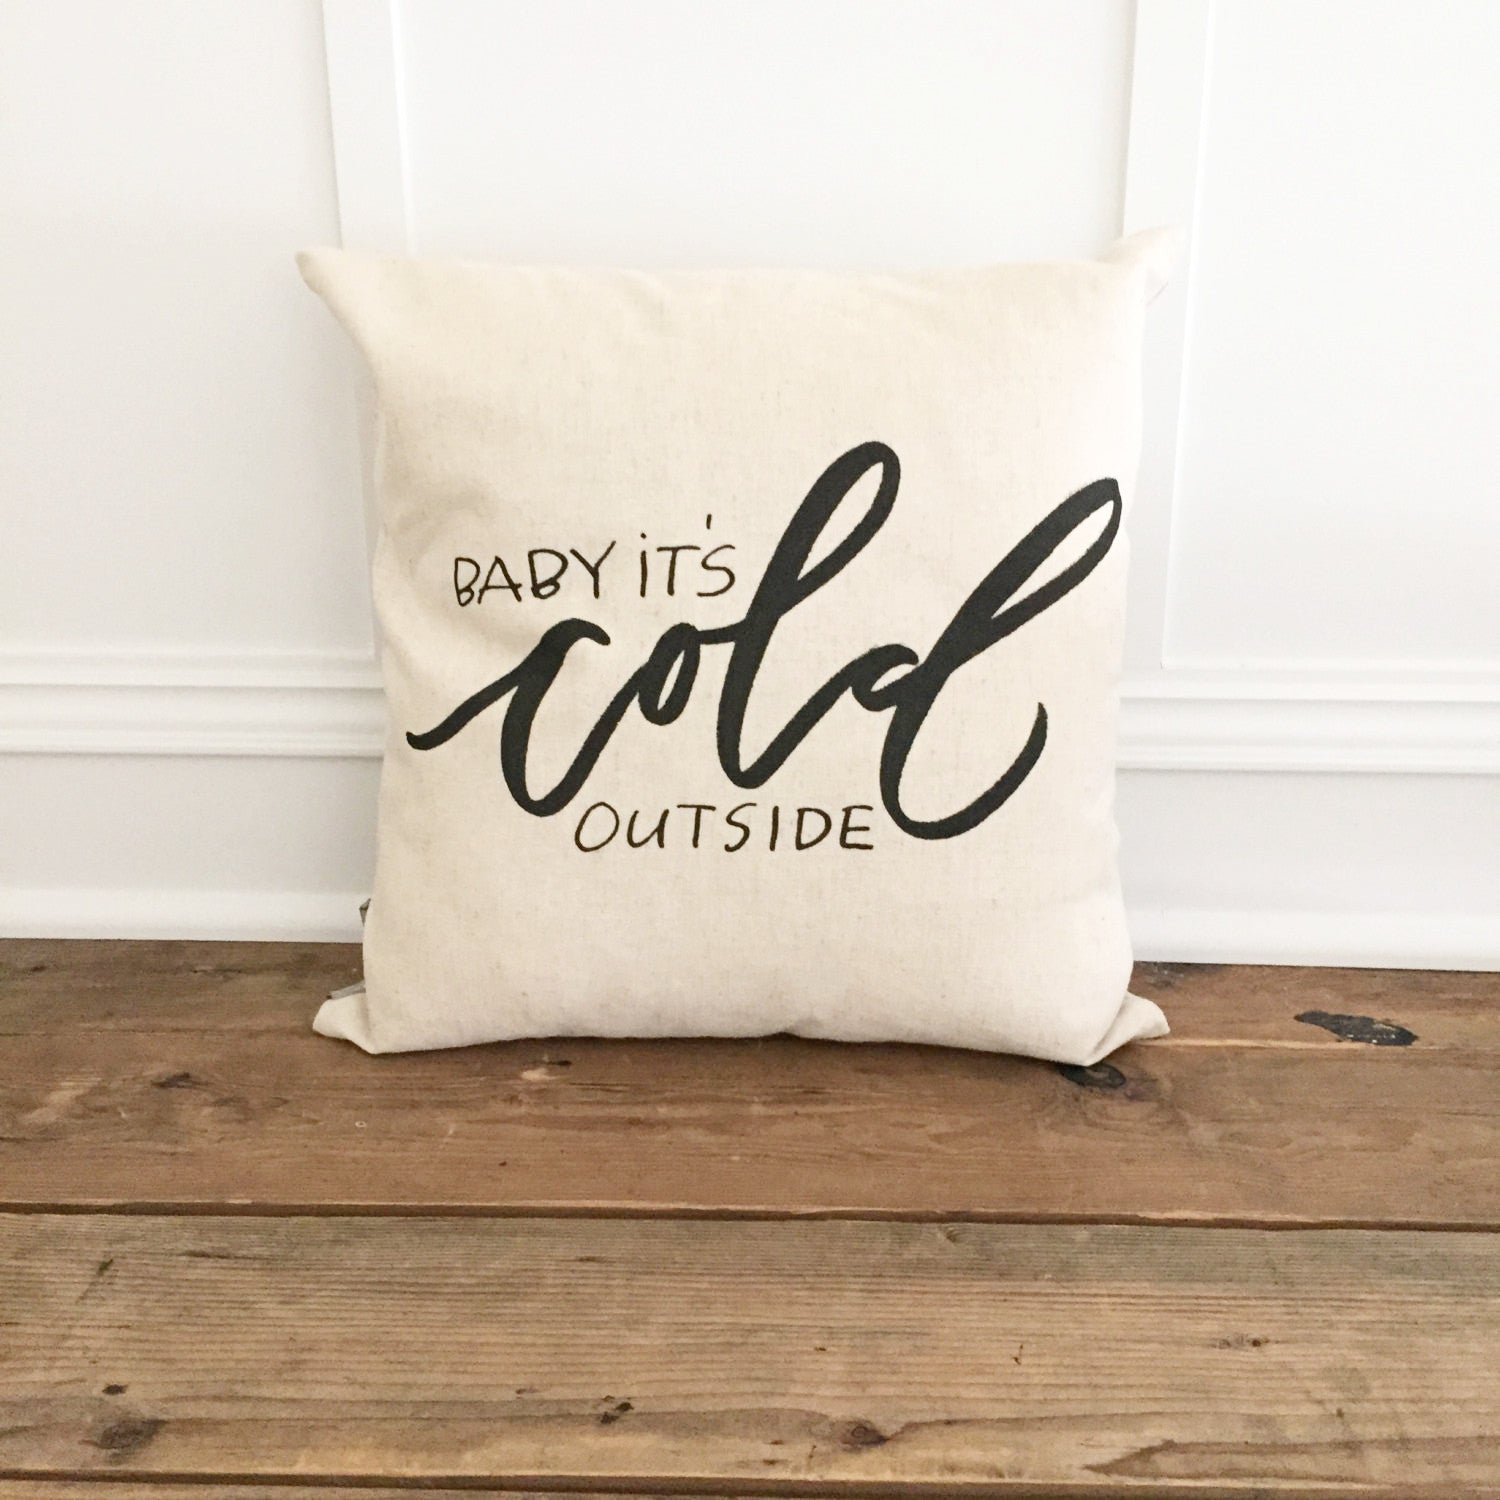 Baby It's Cold Outside (Design 1) Pillow Cover - Linen and Ivory